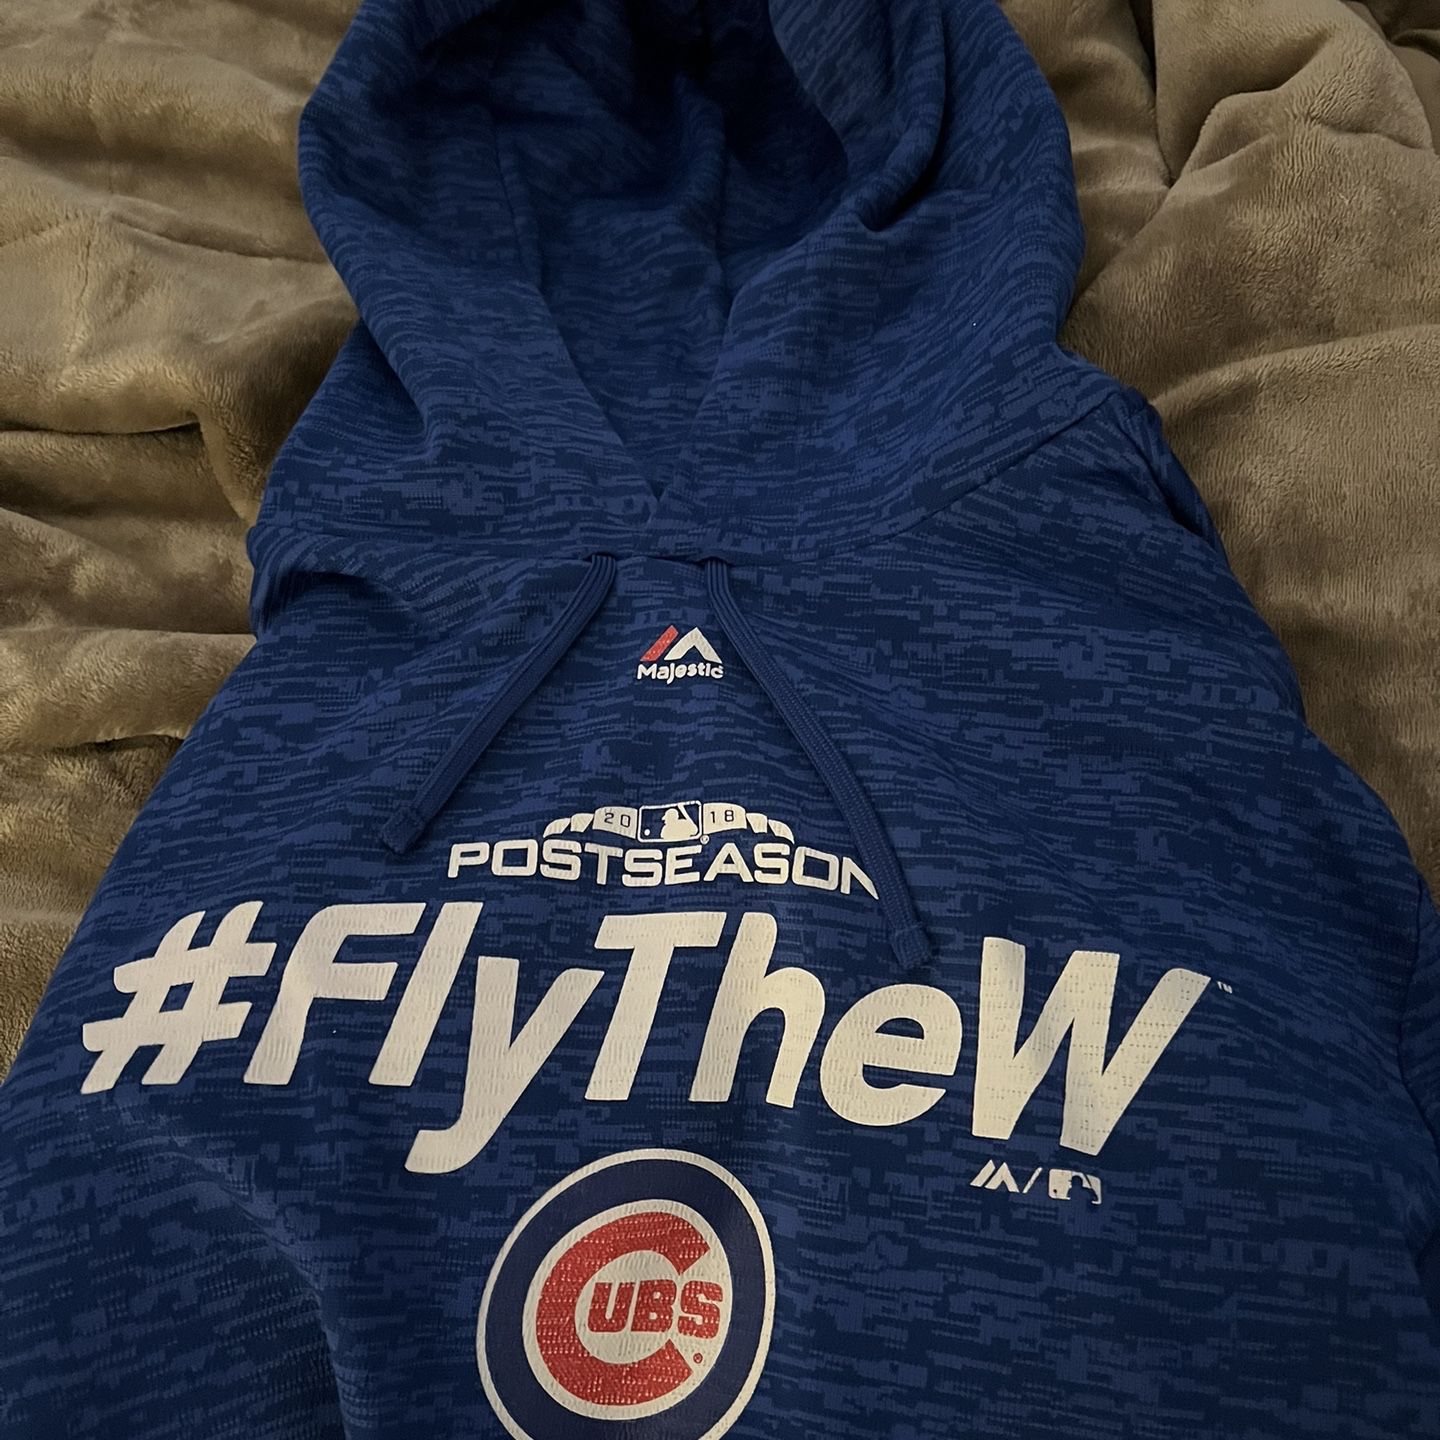 Chicago Cubs Fly The W Sweatshirt for Sale in Crystal Lake, IL